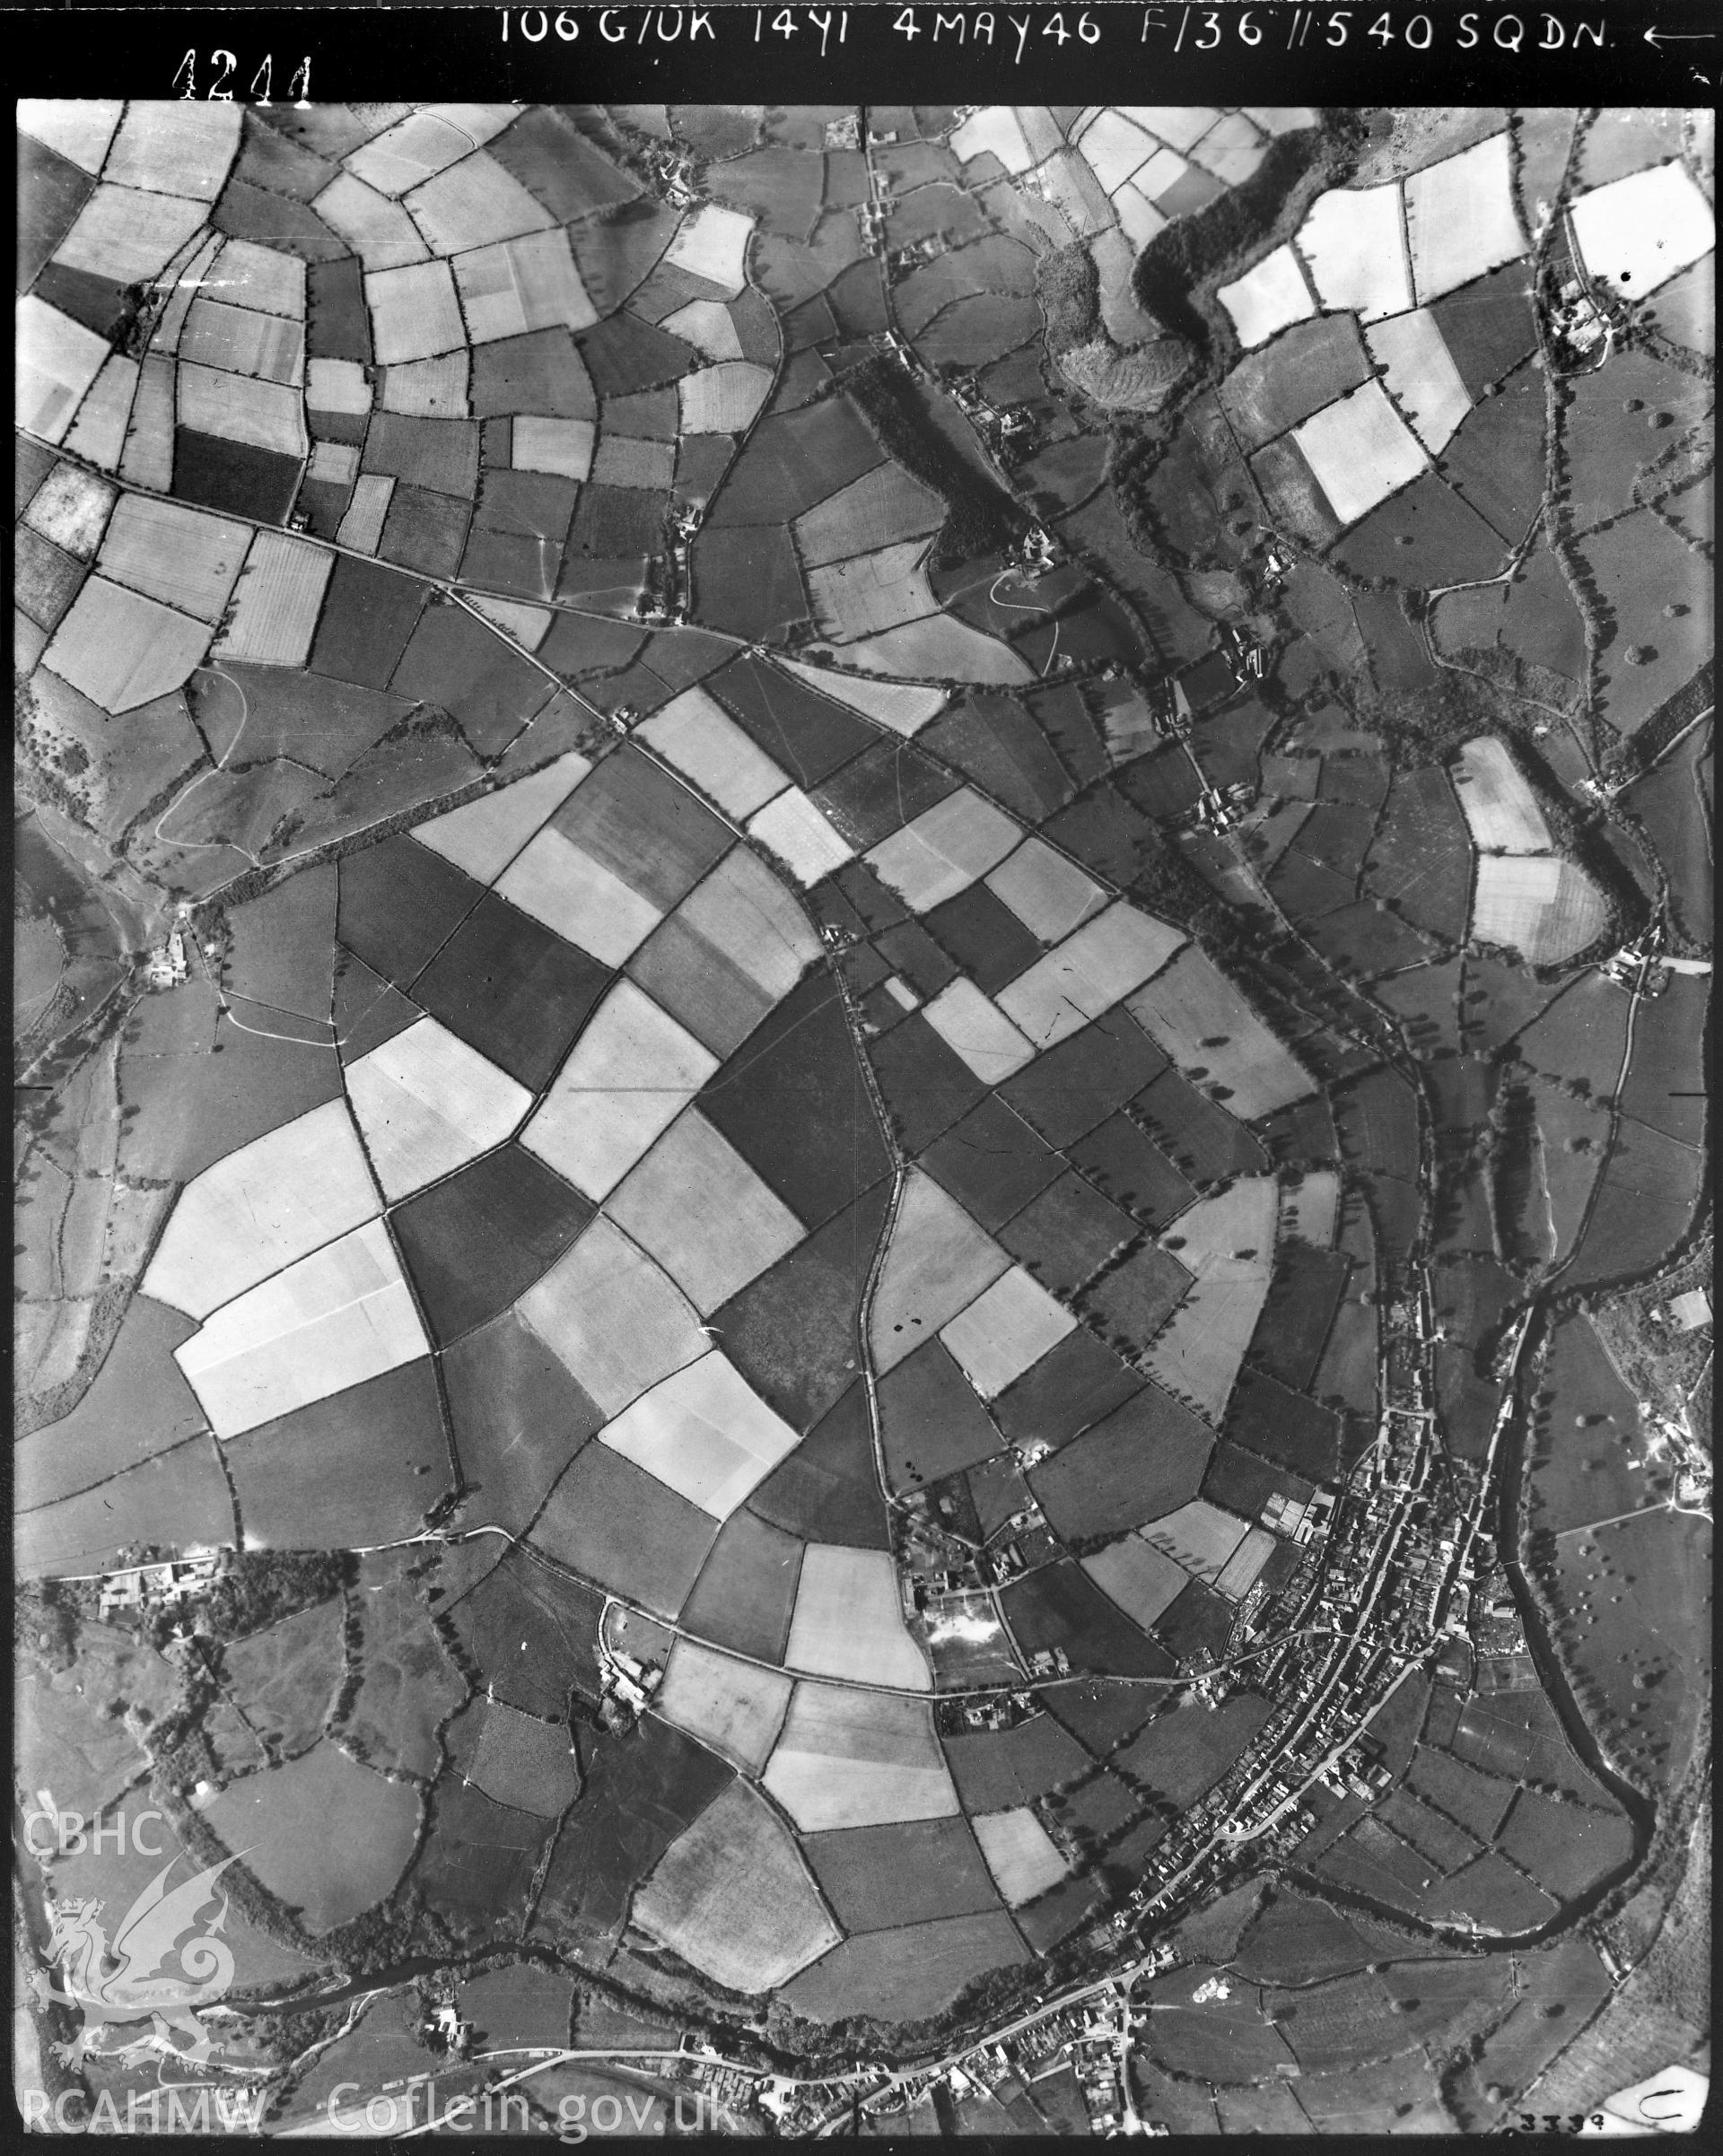 Black and white vertical aerial photograph taken by the RAF on 04/05/1946 centred on SN41034141 at a scale of 1:10000. The photograph includes part of Llandysul community in Ceredigion.